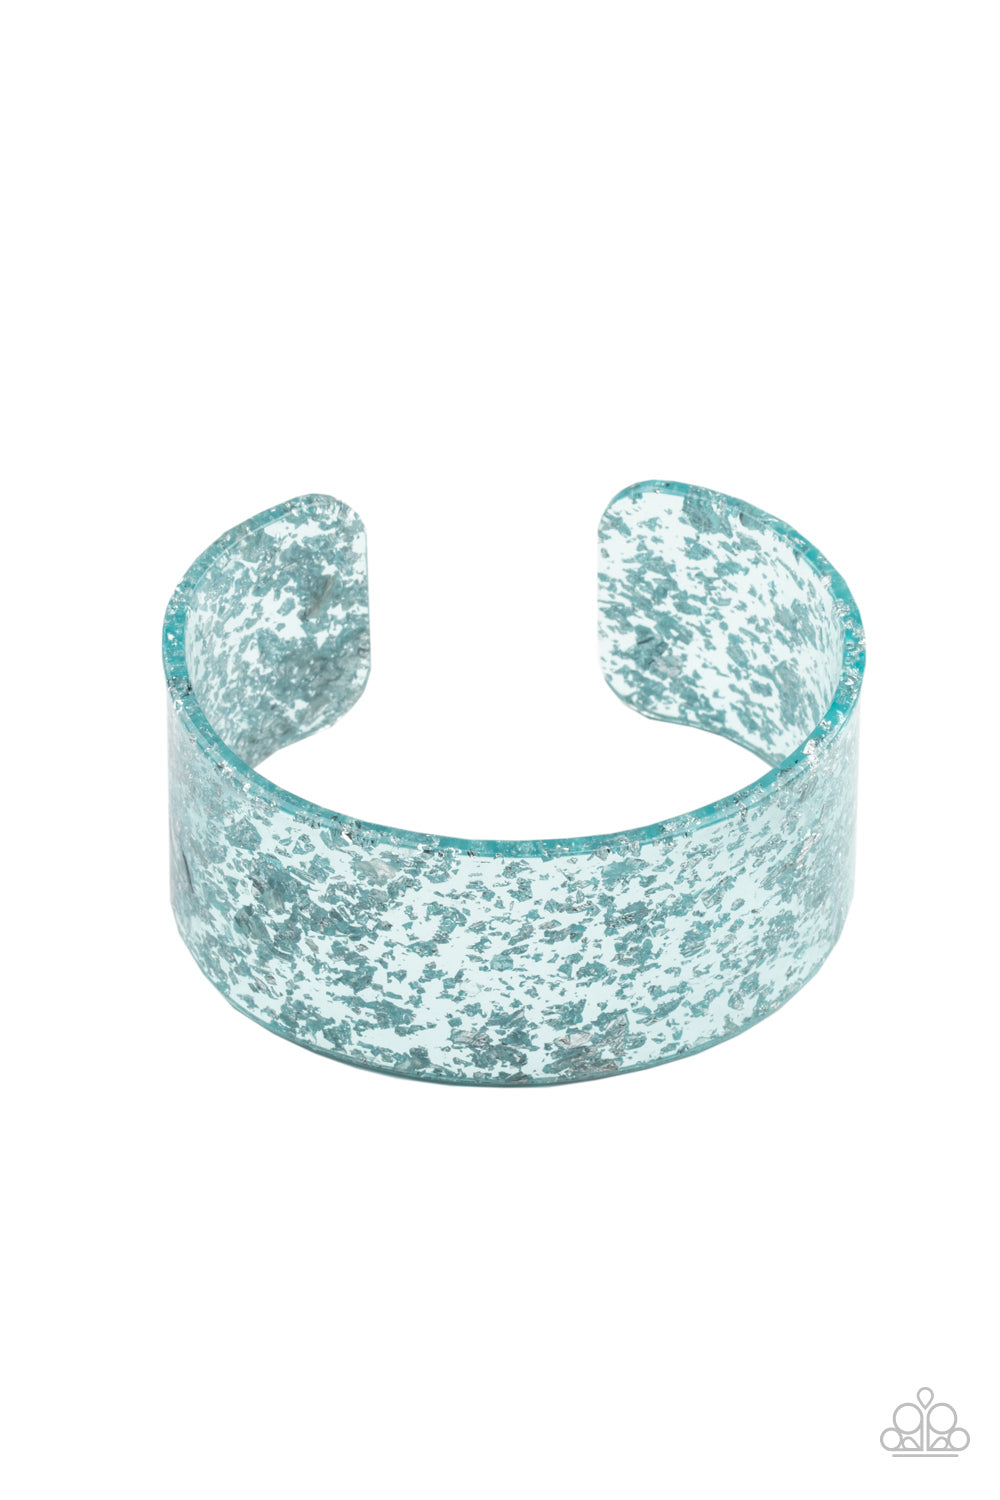 &lt;P&gt;Dainty silvery shavings are encased in a thick blue acrylic cuff, creating an icy incandescence around the wrist. &lt;/P&gt;

&lt;P&gt;&lt;I&gt; Sold as one individual bracelet.&lt;/I&gt;&lt;/p&gt;


&lt;img src=\&quot;https://d9b54x484lq62.cloudfront.net/paparazzi/shopping/images/517_tag150x115_1.png\&quot; alt=\&quot;New Kit\&quot; align=\&quot;middle\&quot; height=\&quot;50\&quot; width=\&quot;50\&quot;/&gt;